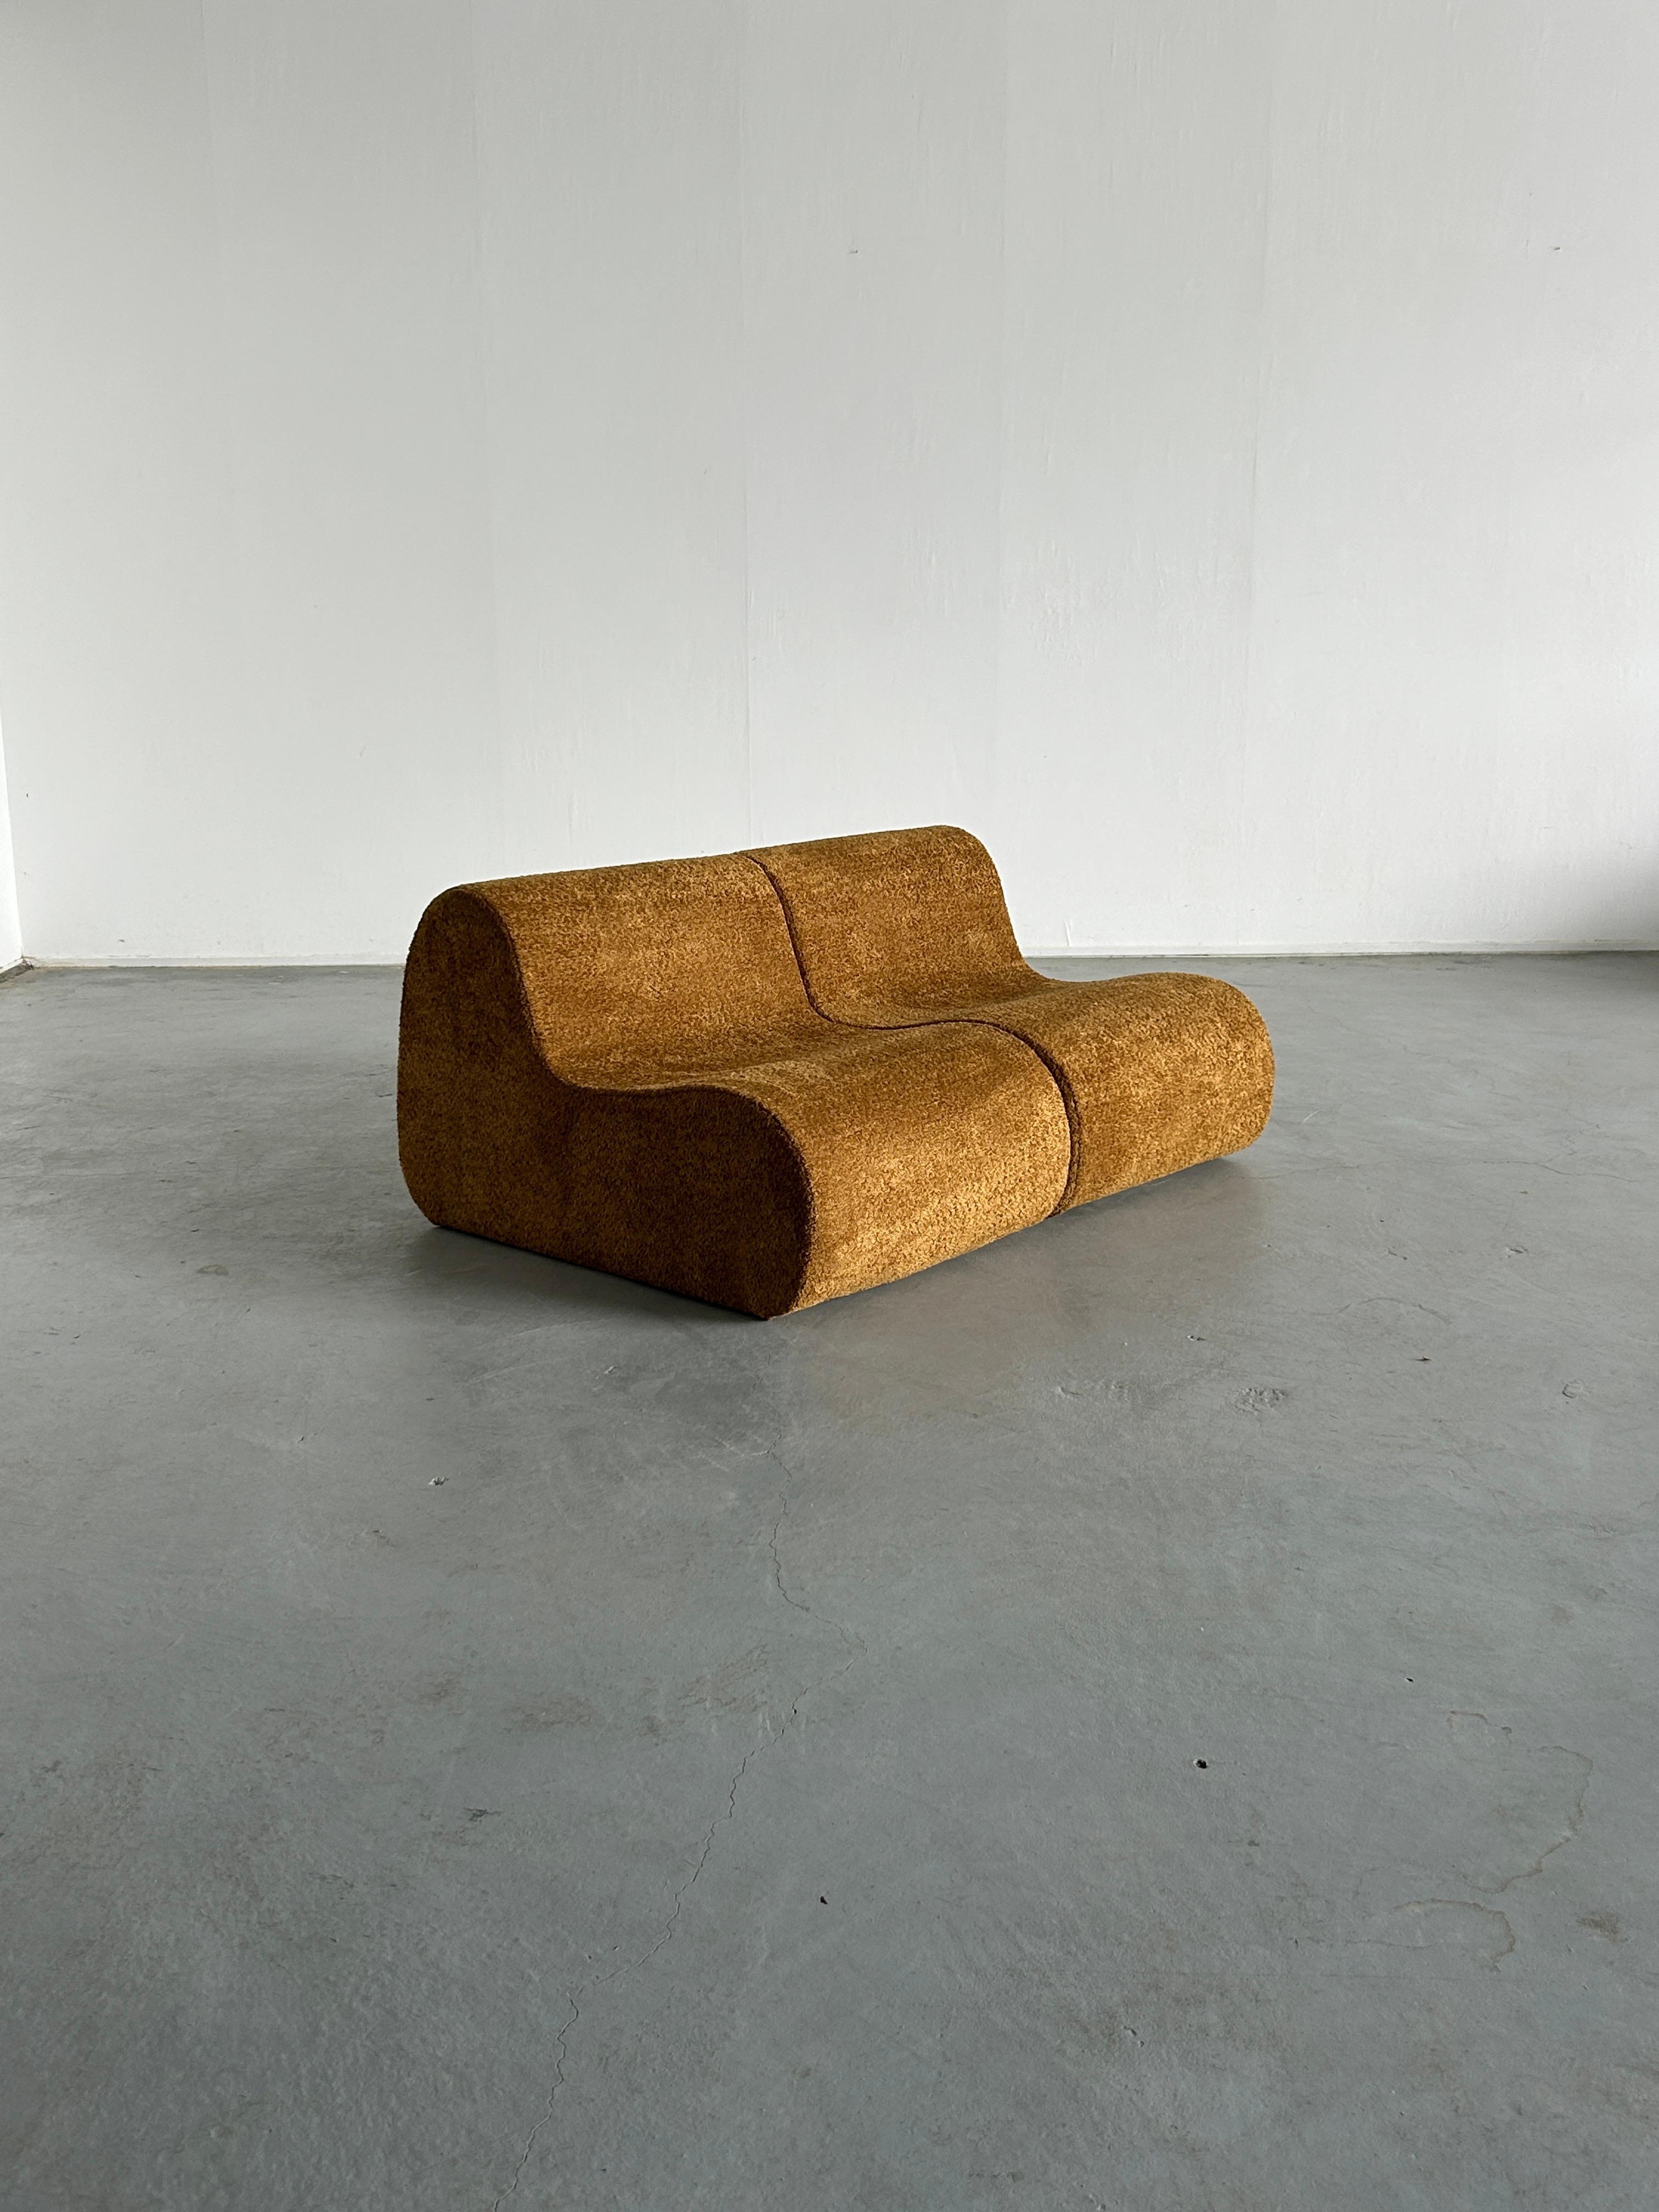 Pair of Vintage Italian Mid-Century Modern lounge chairs or club chairs. Modules can be used as a modular sofa or modular seating set.
Beautiful and unique shape.
A 1970 design and production, fully restored (enforced foam structure,